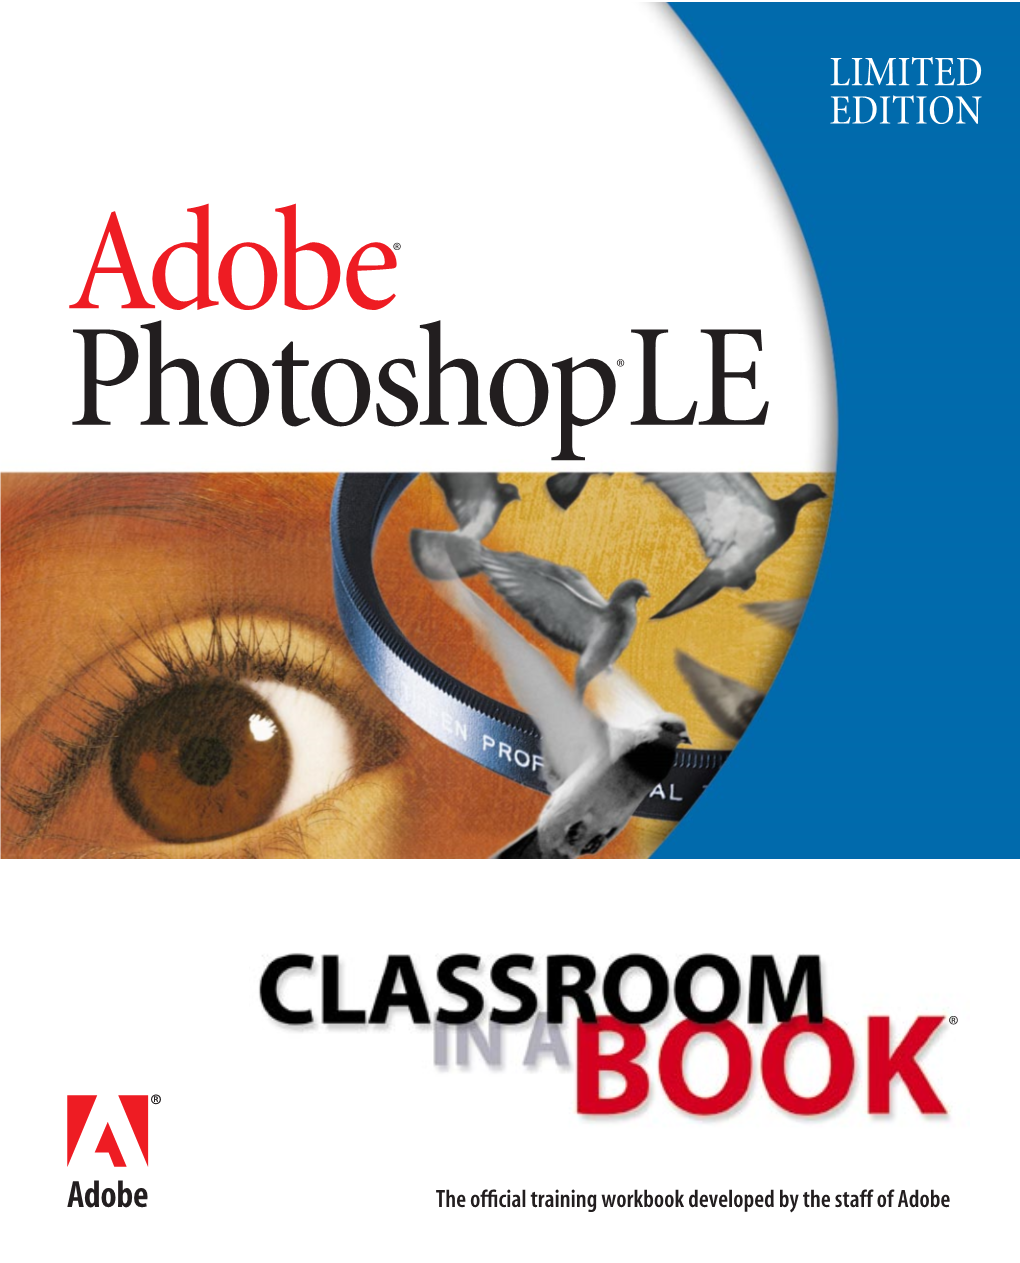 Photoshop LE Classroom in a Book® Is Part of the Ofﬁcial Training Series for Adobe Graphics and Publishing Software Developed by Experts at Adobe Systems